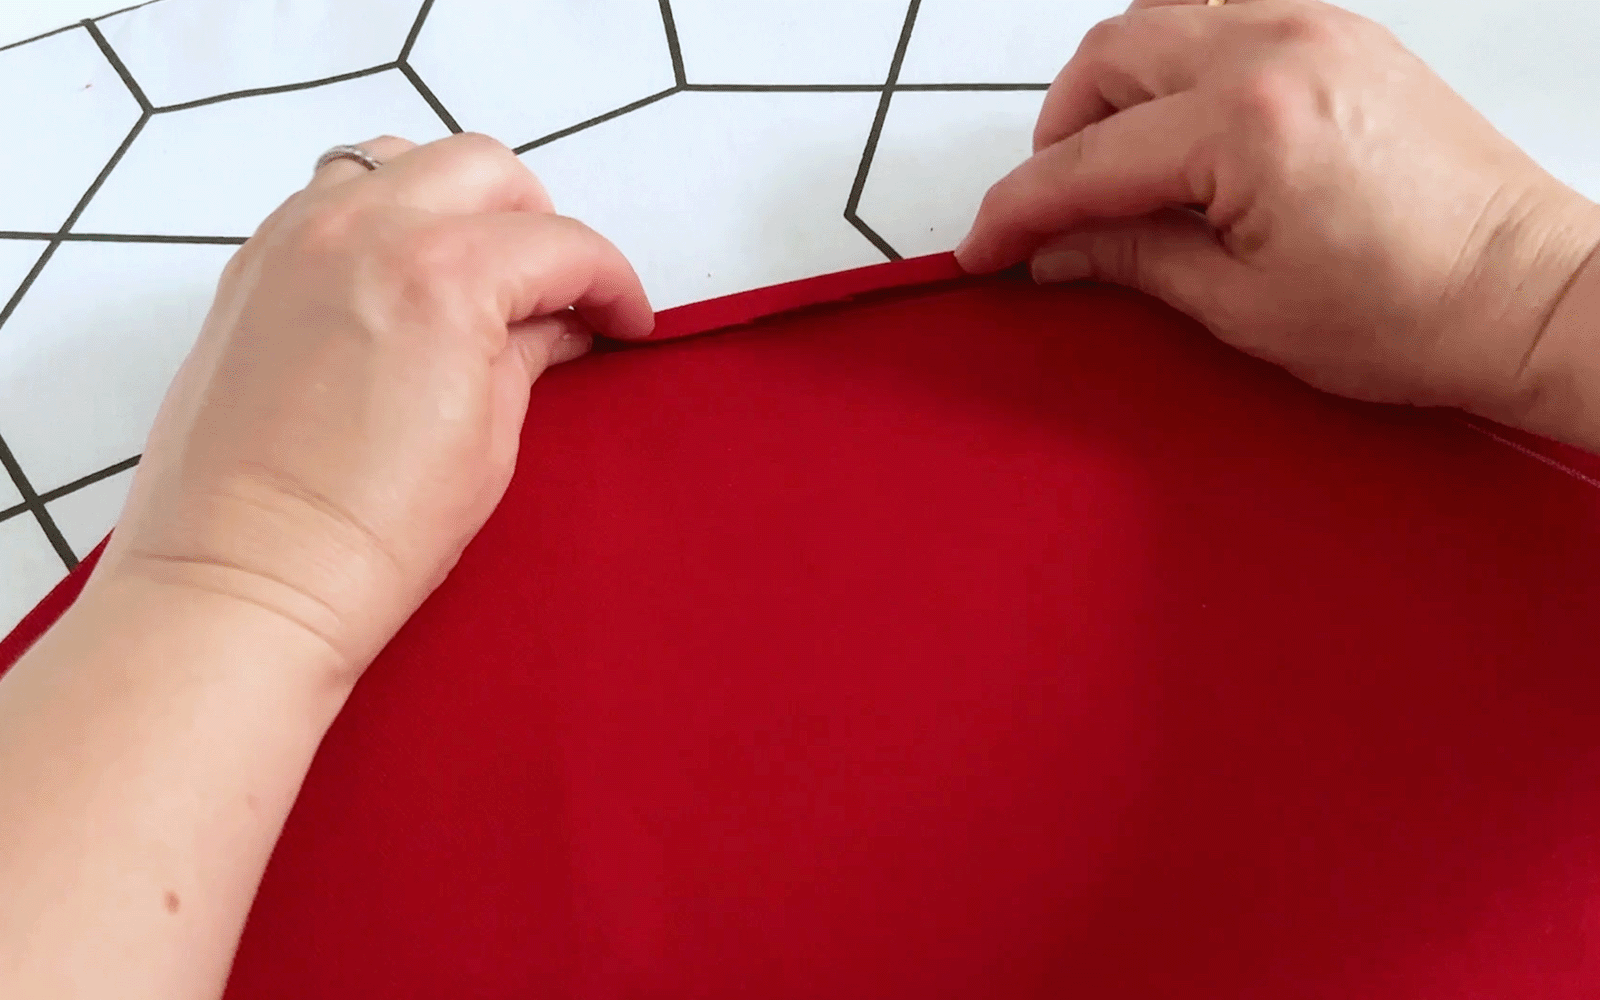 Folding red fabric and iron